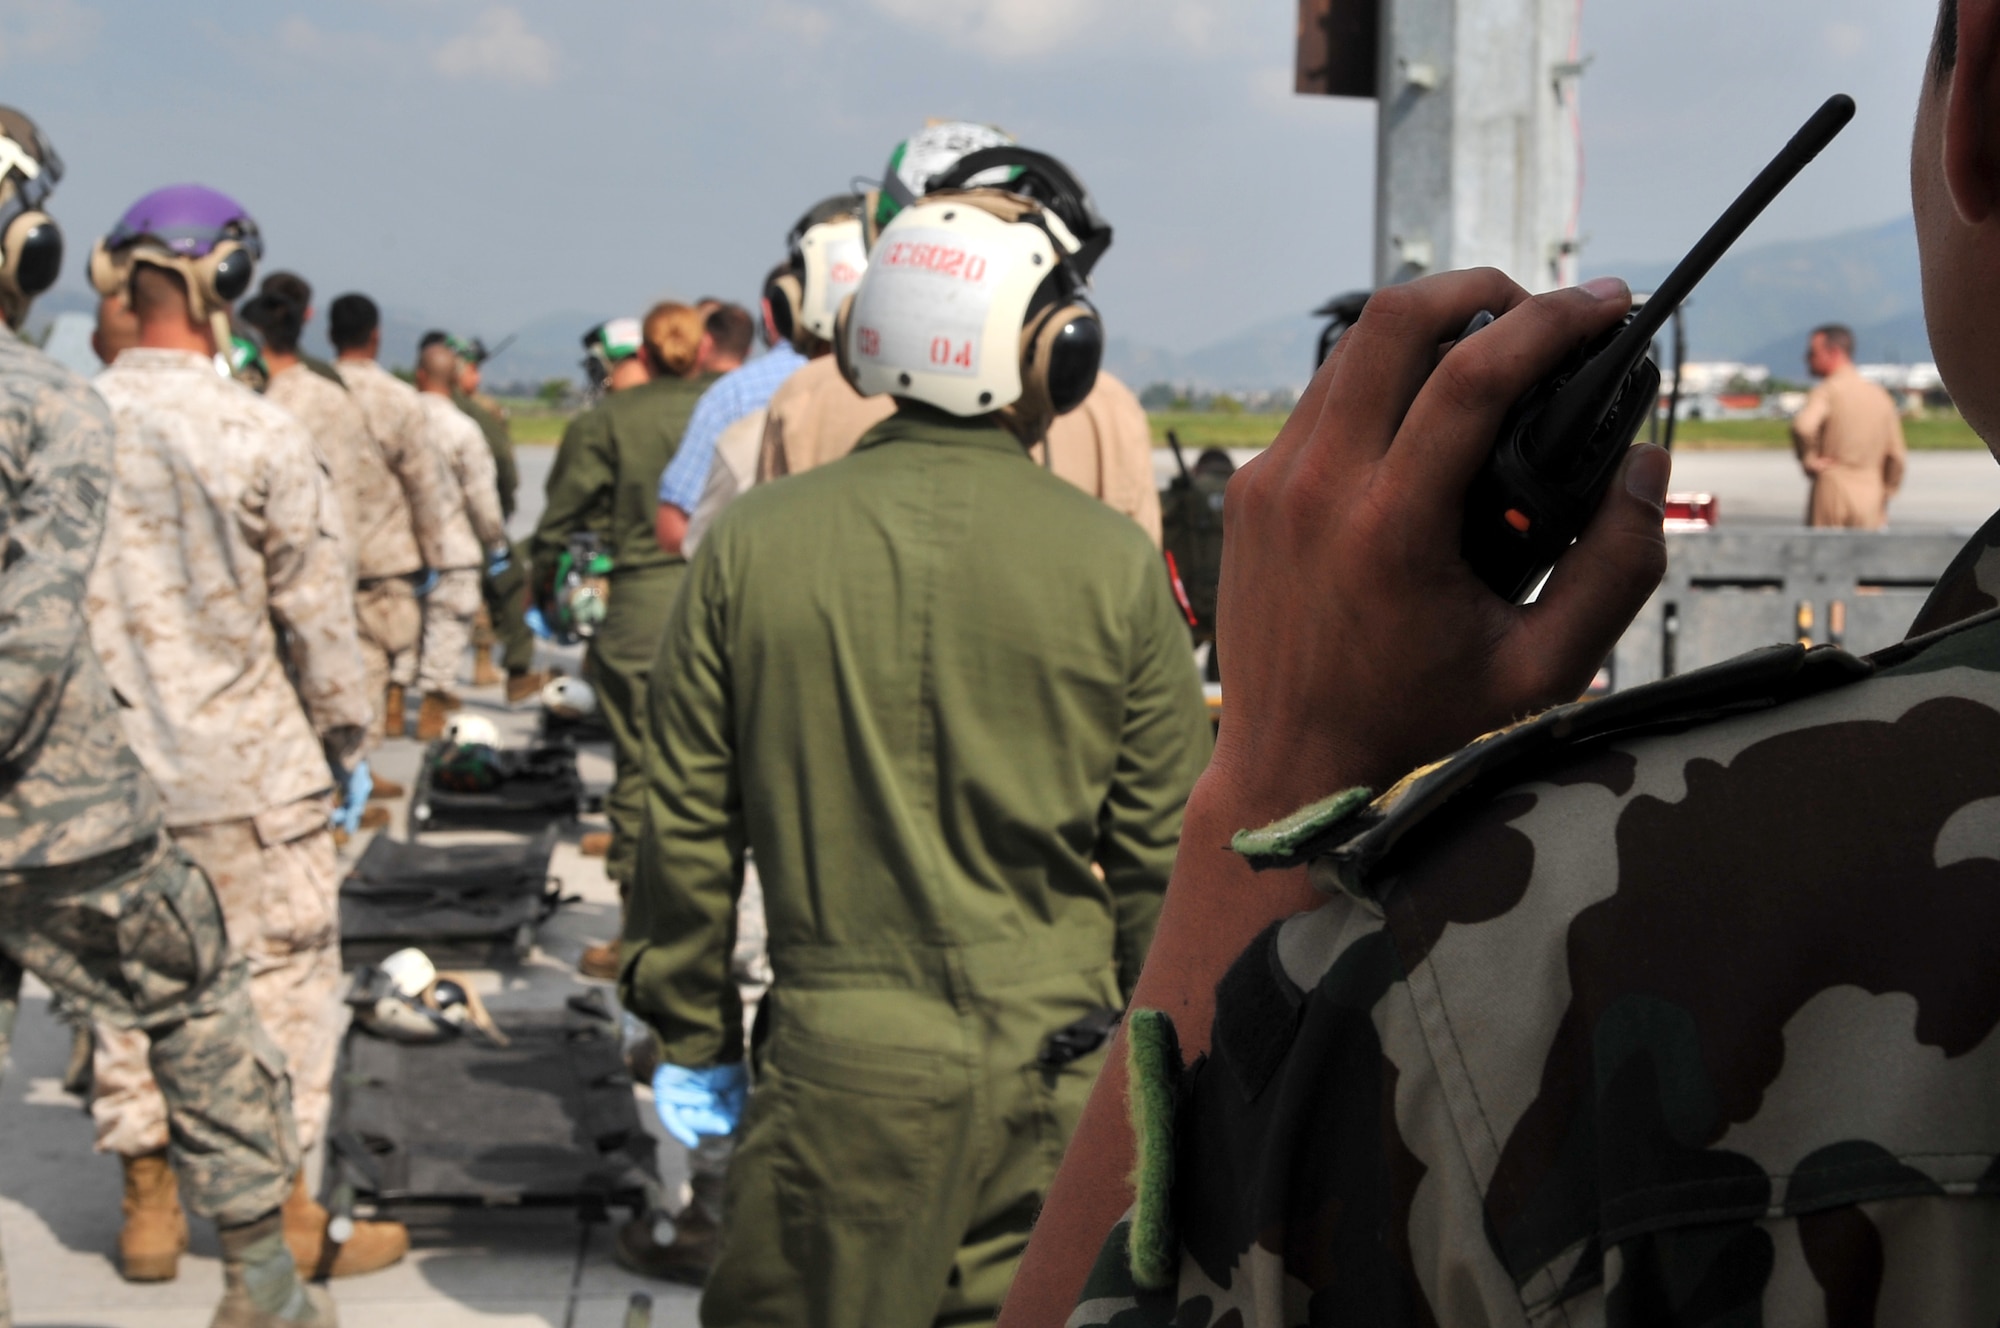 A Nepalese army soldier makes radio contact while U.S. Marines and Airmen standby with litters to transport earthquake victims at the Tribhuvan International Airport in Kathmandu, Nepal, May 12, 2015. Joint Task Force-505 members worked with the Nepalese army to triage, treat and transport patients after a 7.3 magnitude earthquake struck the same day following a 7.8 magnitude earthquake that devastated the nation April 25, 2015. (U.S. Air Force photo by Staff Sgt. Melissa B. White/Released)